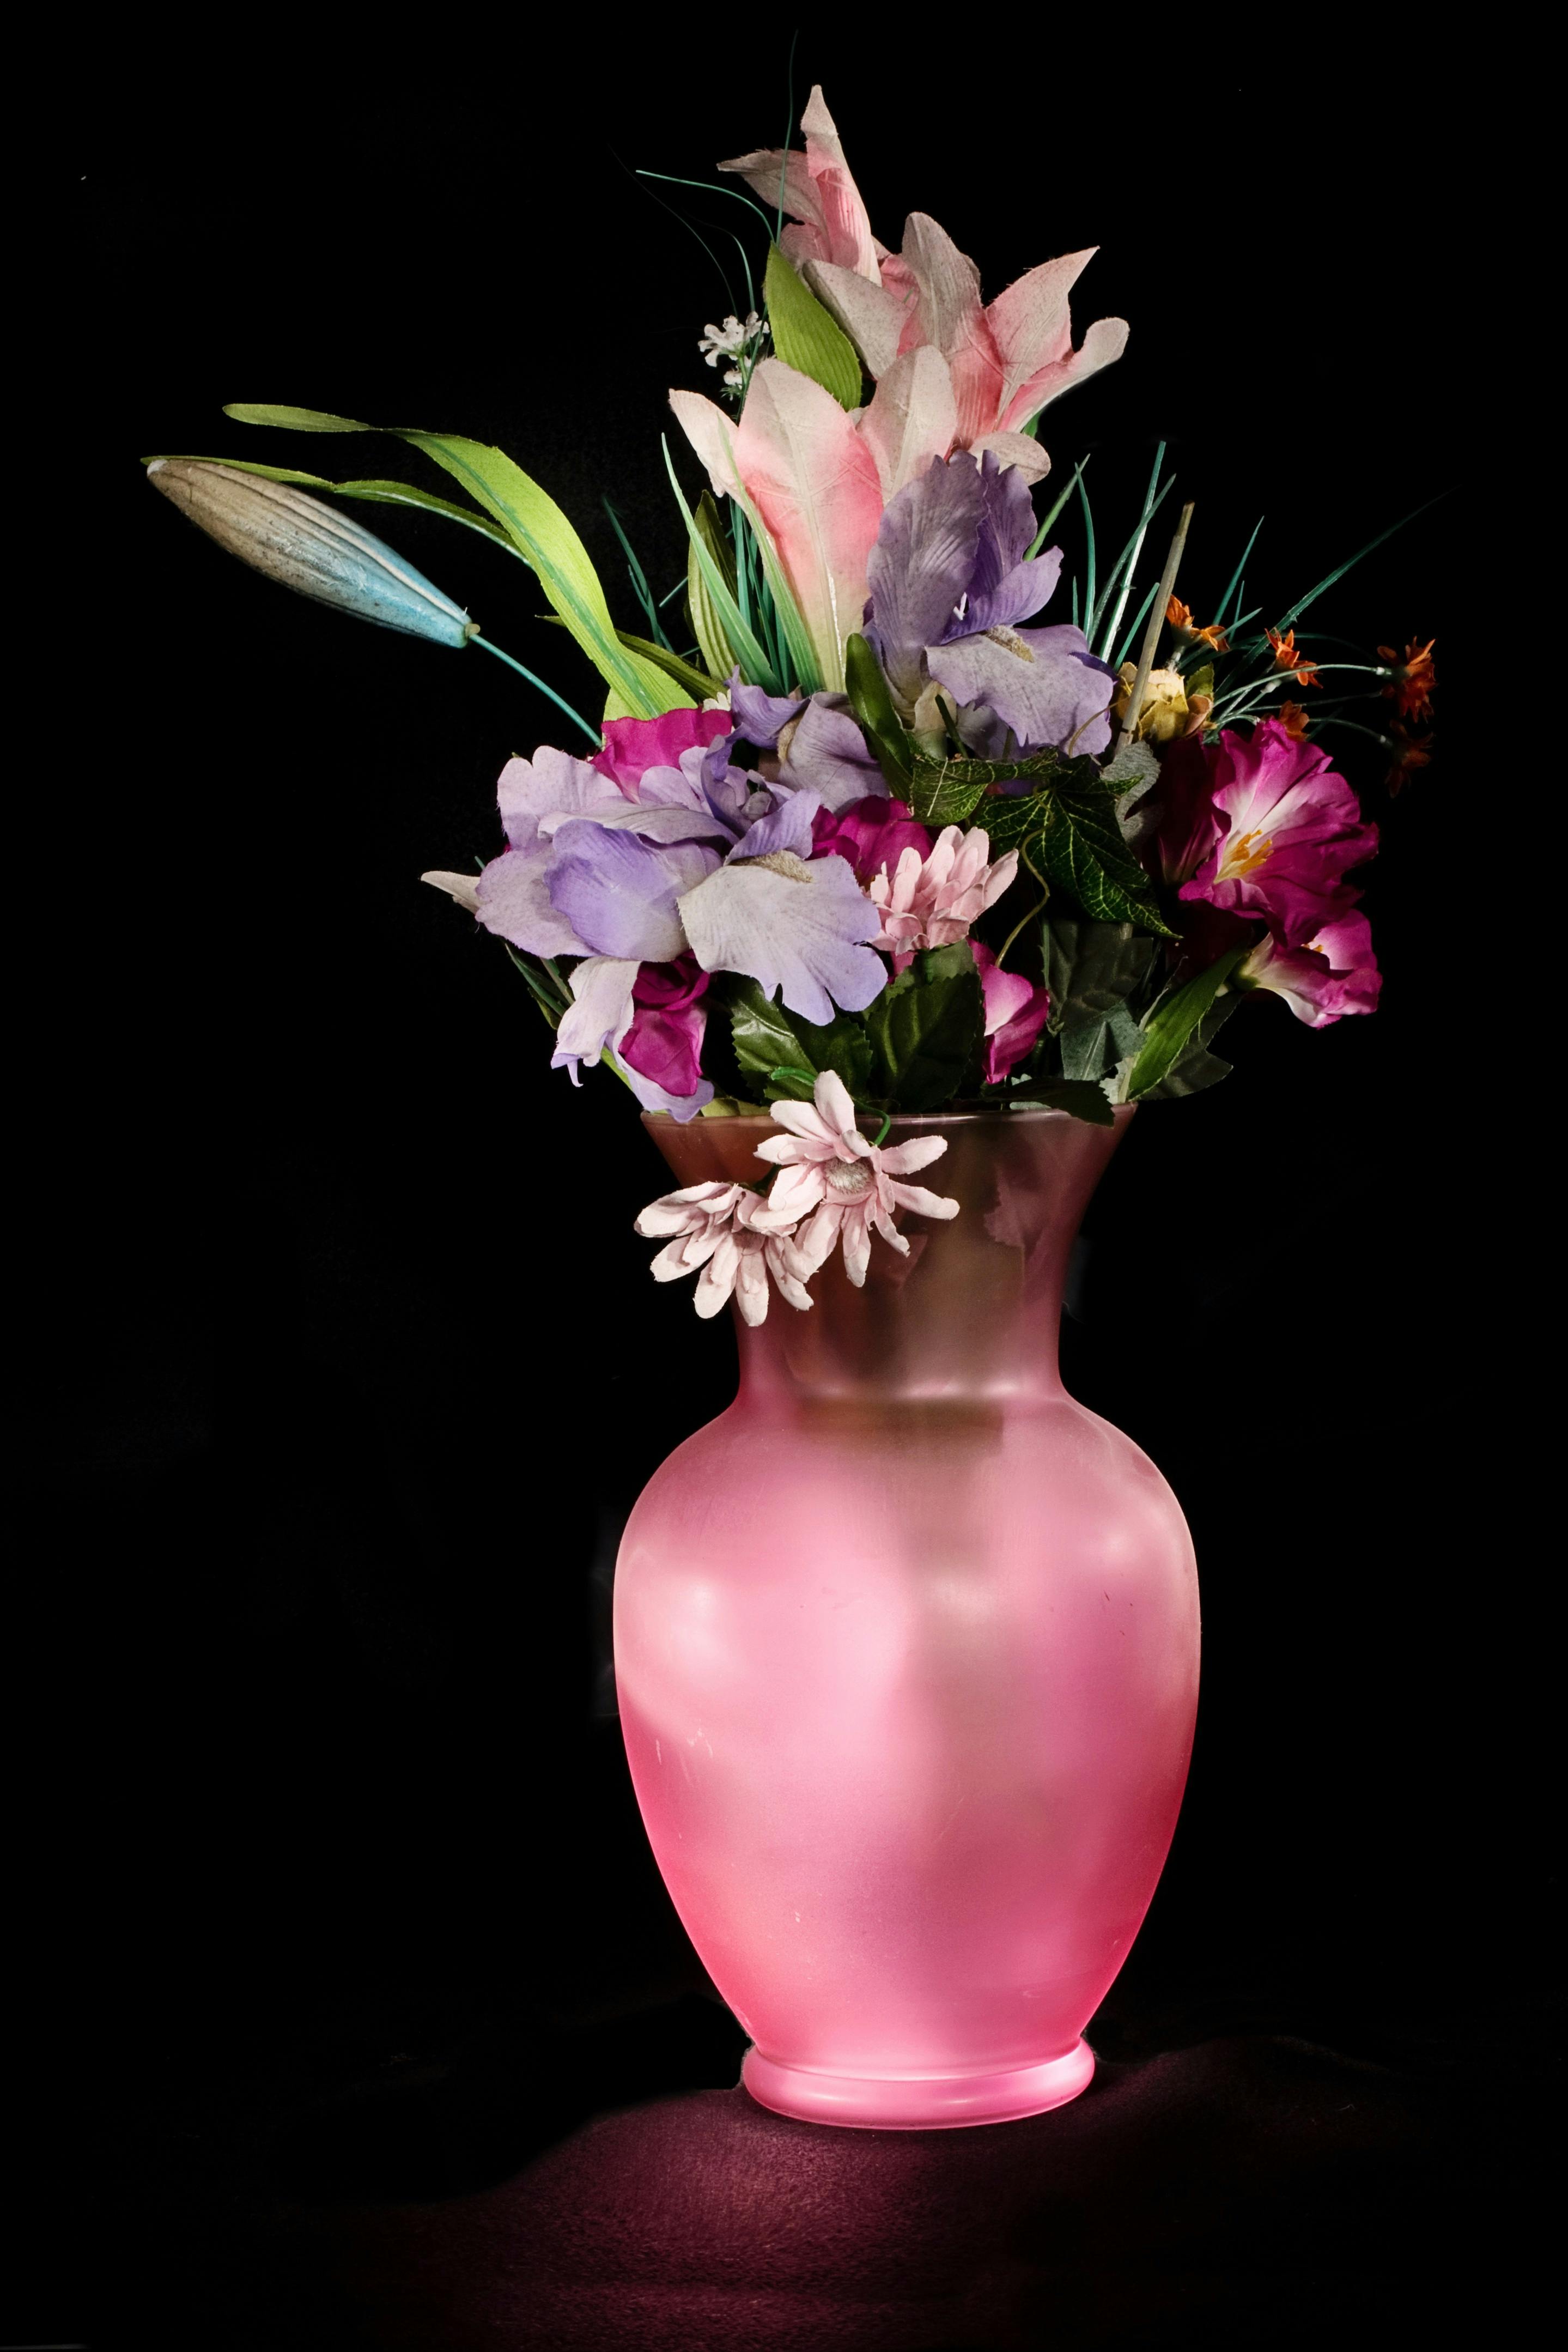 Flower Vase Photos, Download The Best Free Flower Vase Stock Photos & Hd  Images